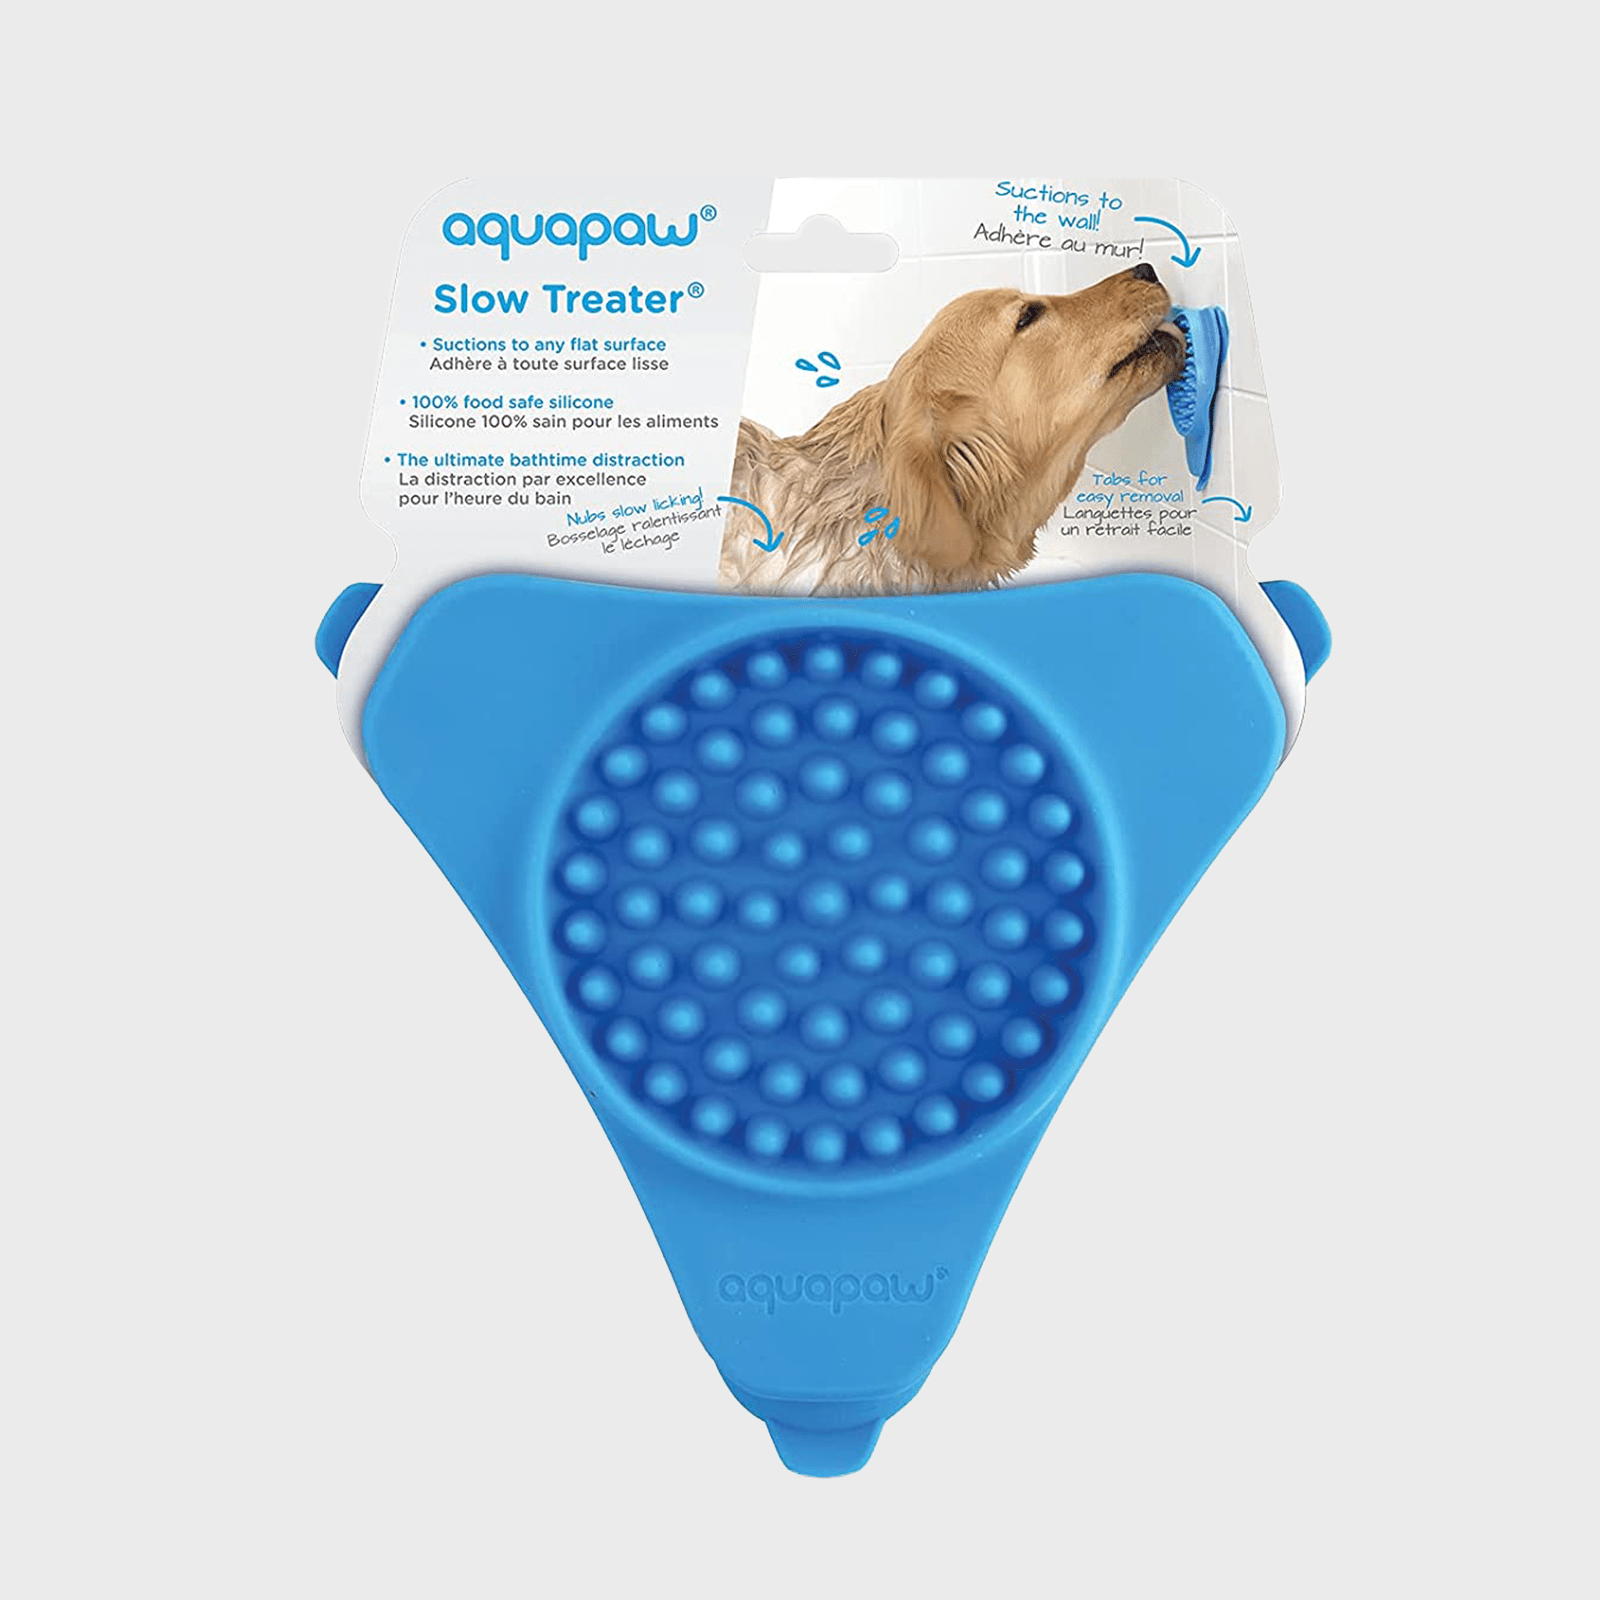 Mighty Paw Dog Lick Pad - BPA-Free Silicone Mat - Anxiety Relief, Dental  Health Support, Easy Grooming, Slow Feeding, Dishwasher Safe